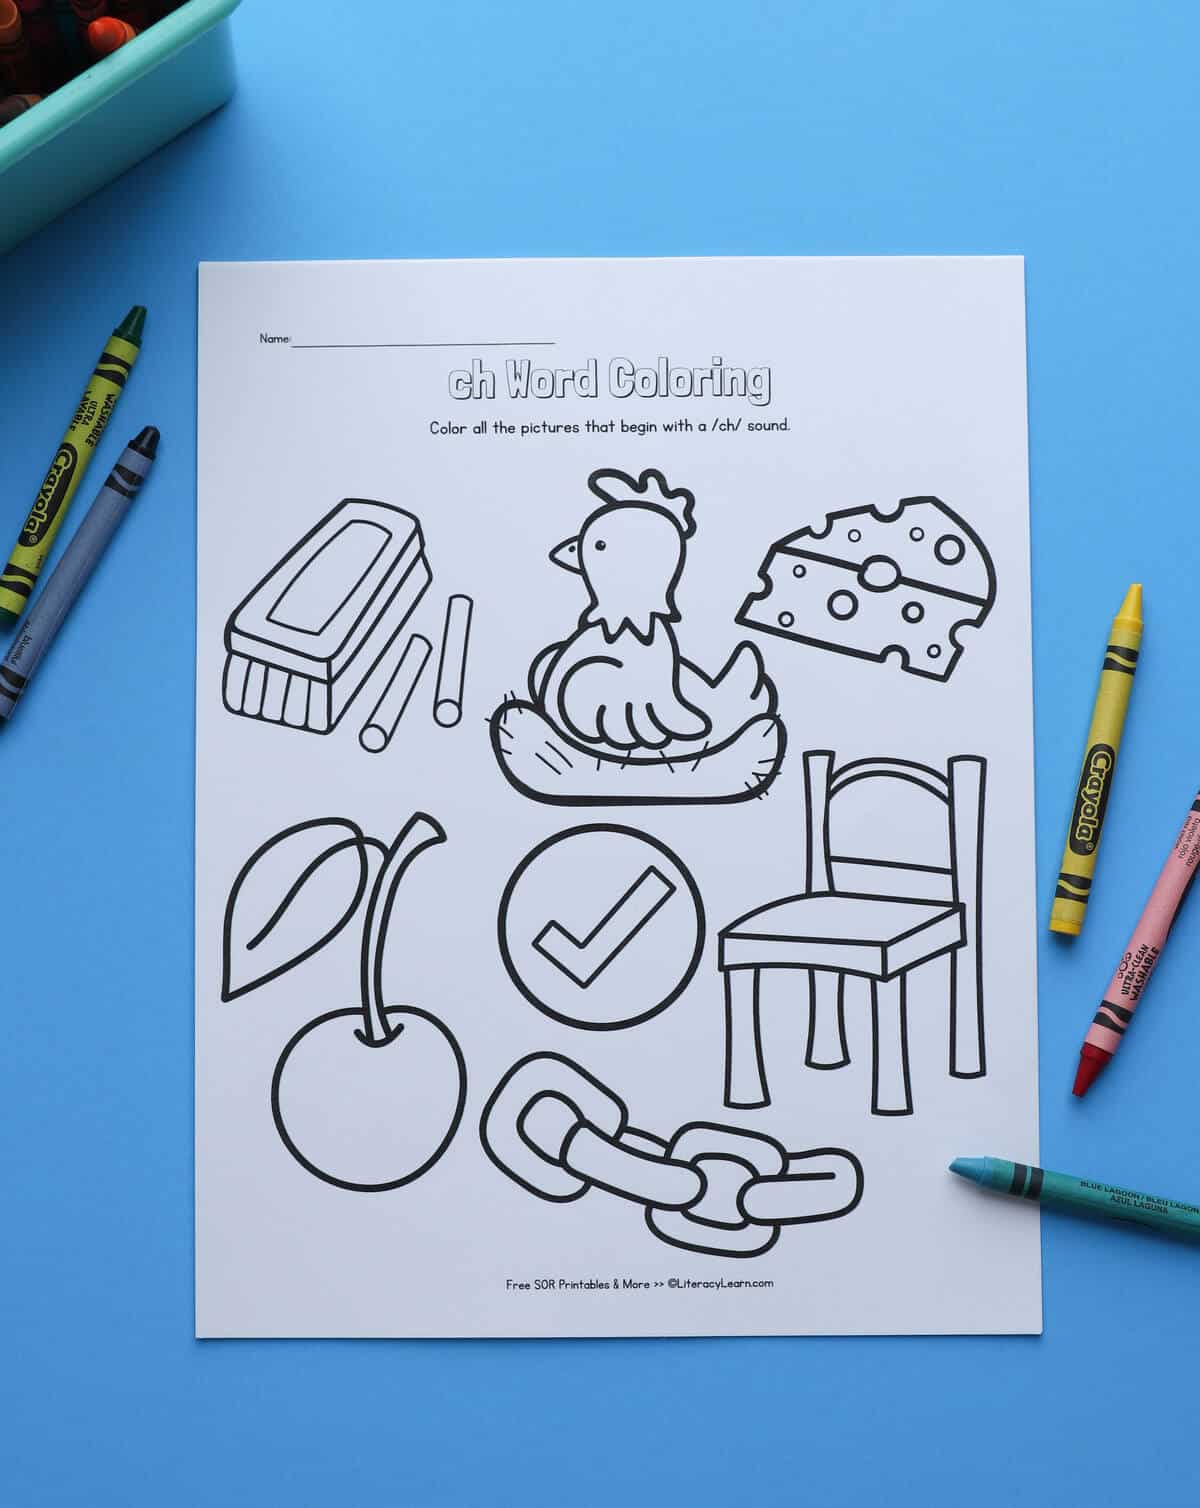 A printed coloring sheet with pictures that begin with ch, including chicken, chair, and cheese.